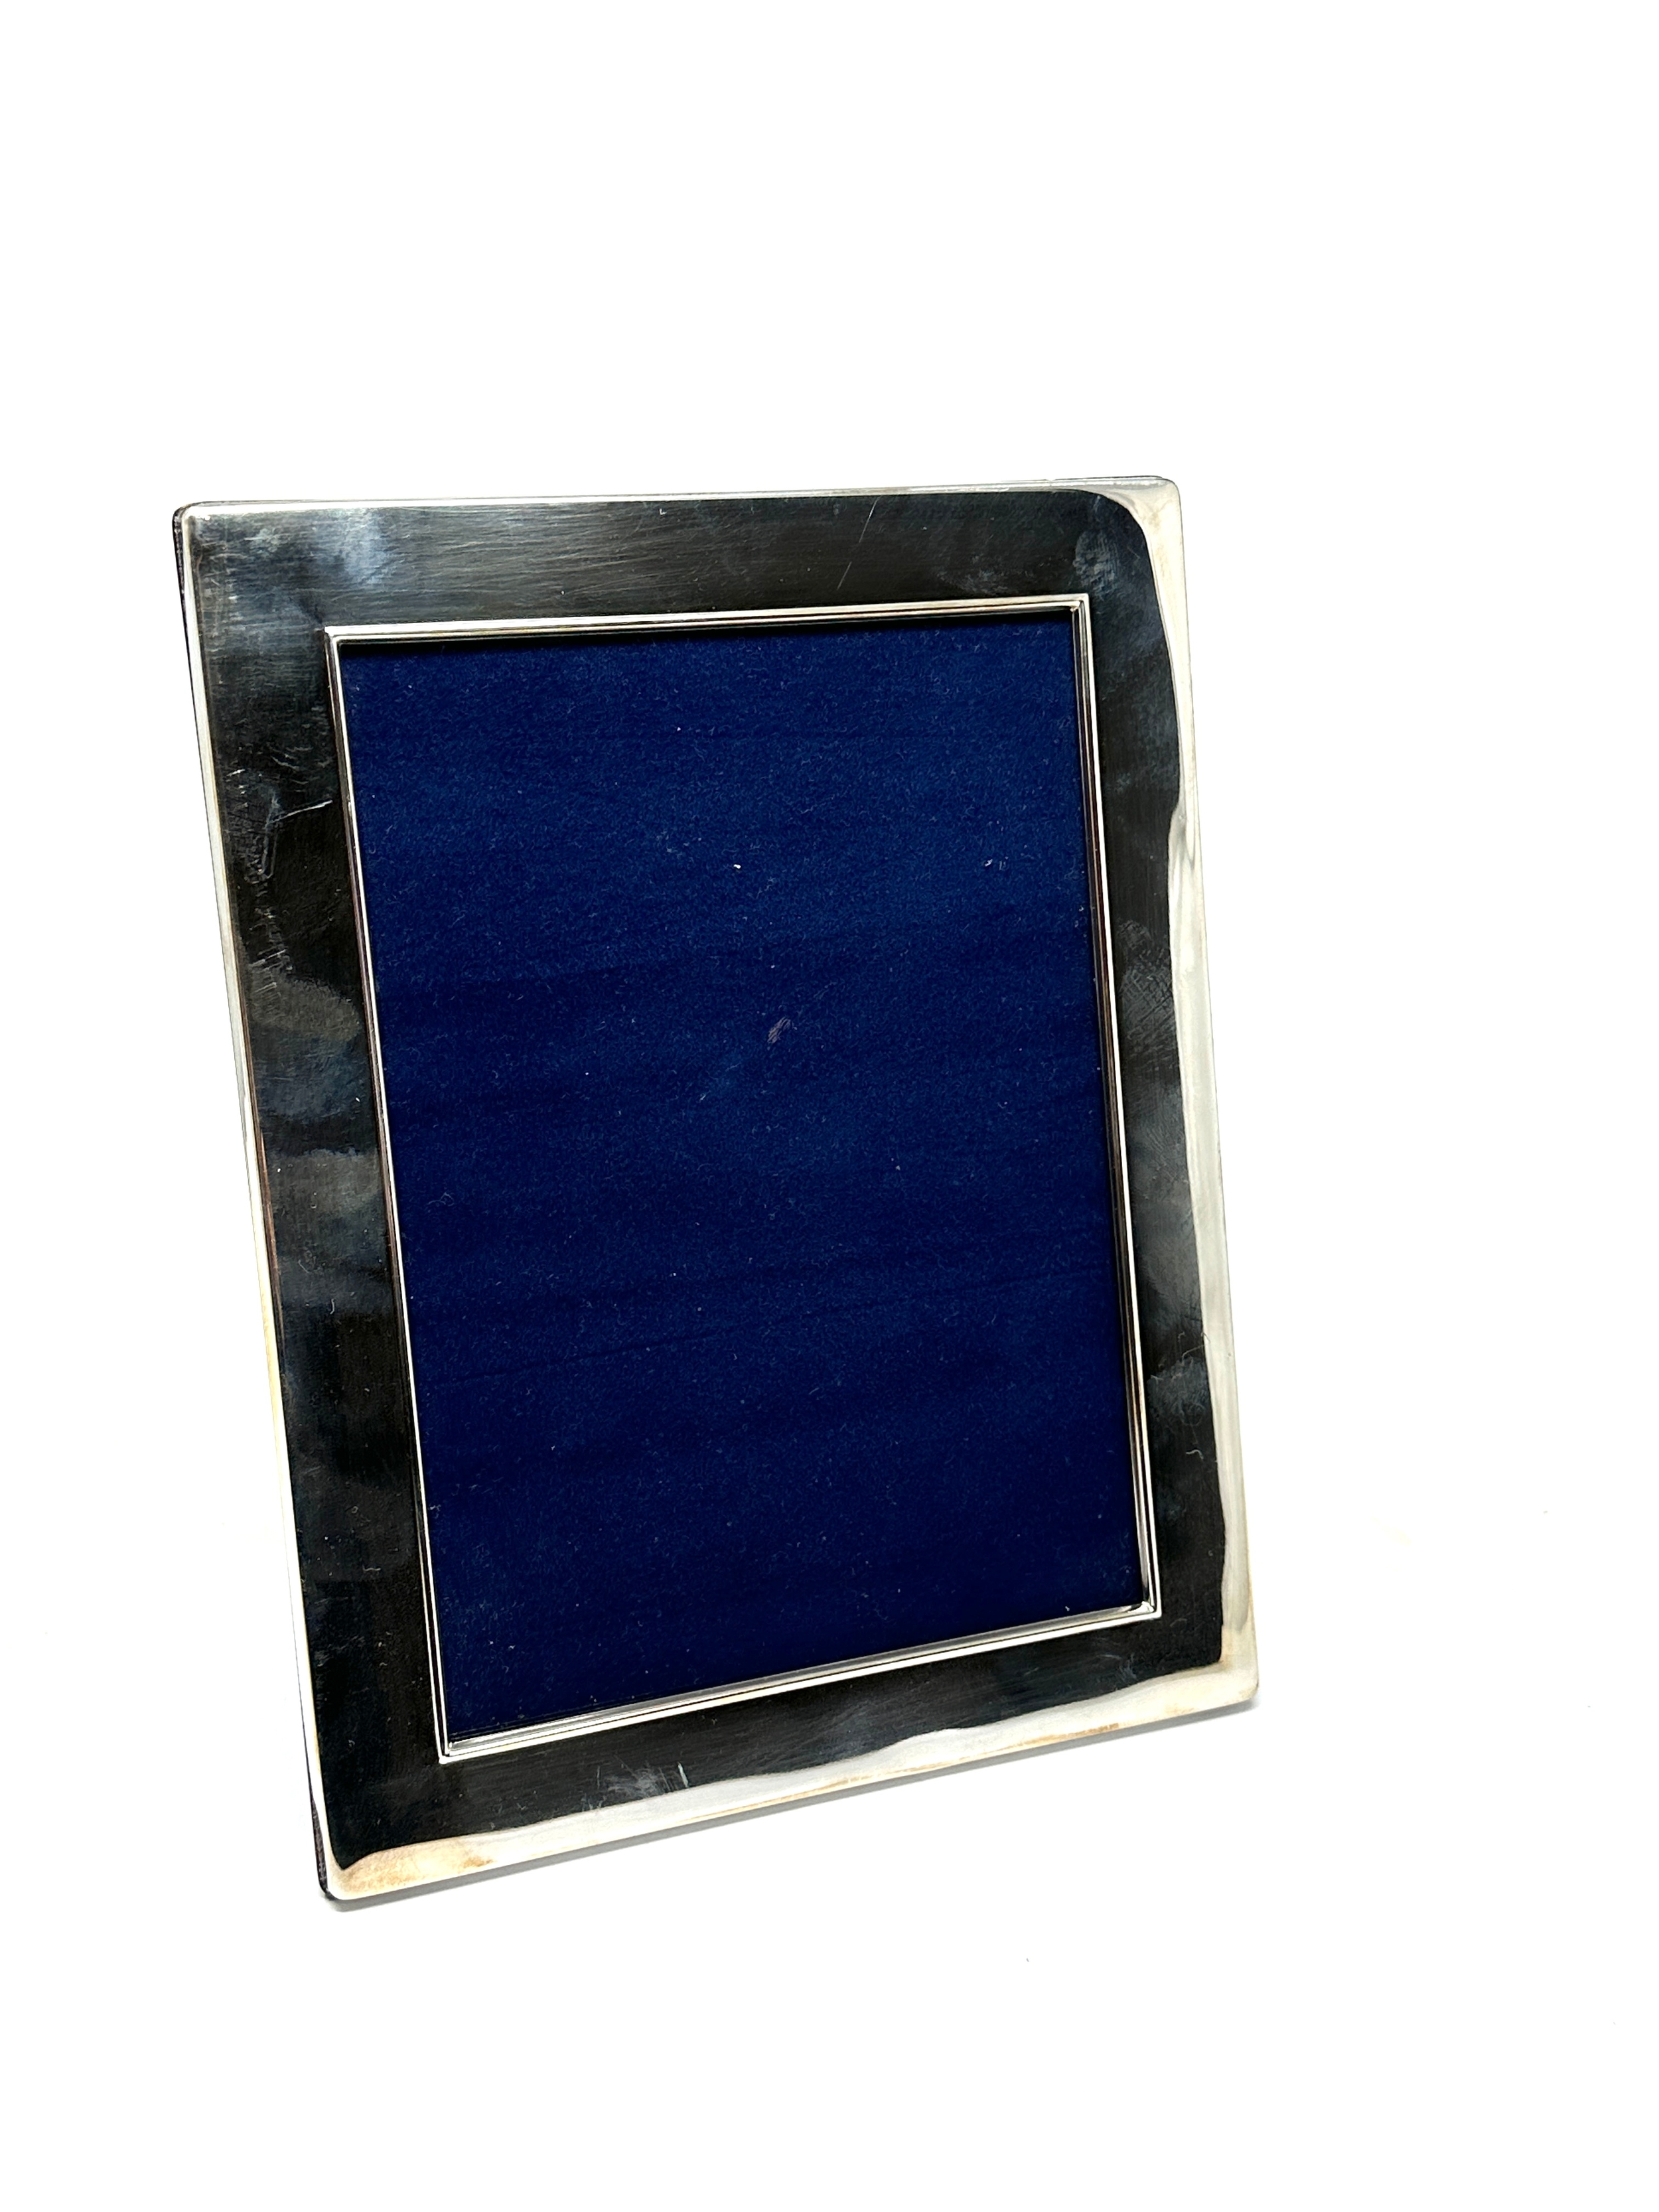 large silver picture frame measures approx 22cm by 17cm